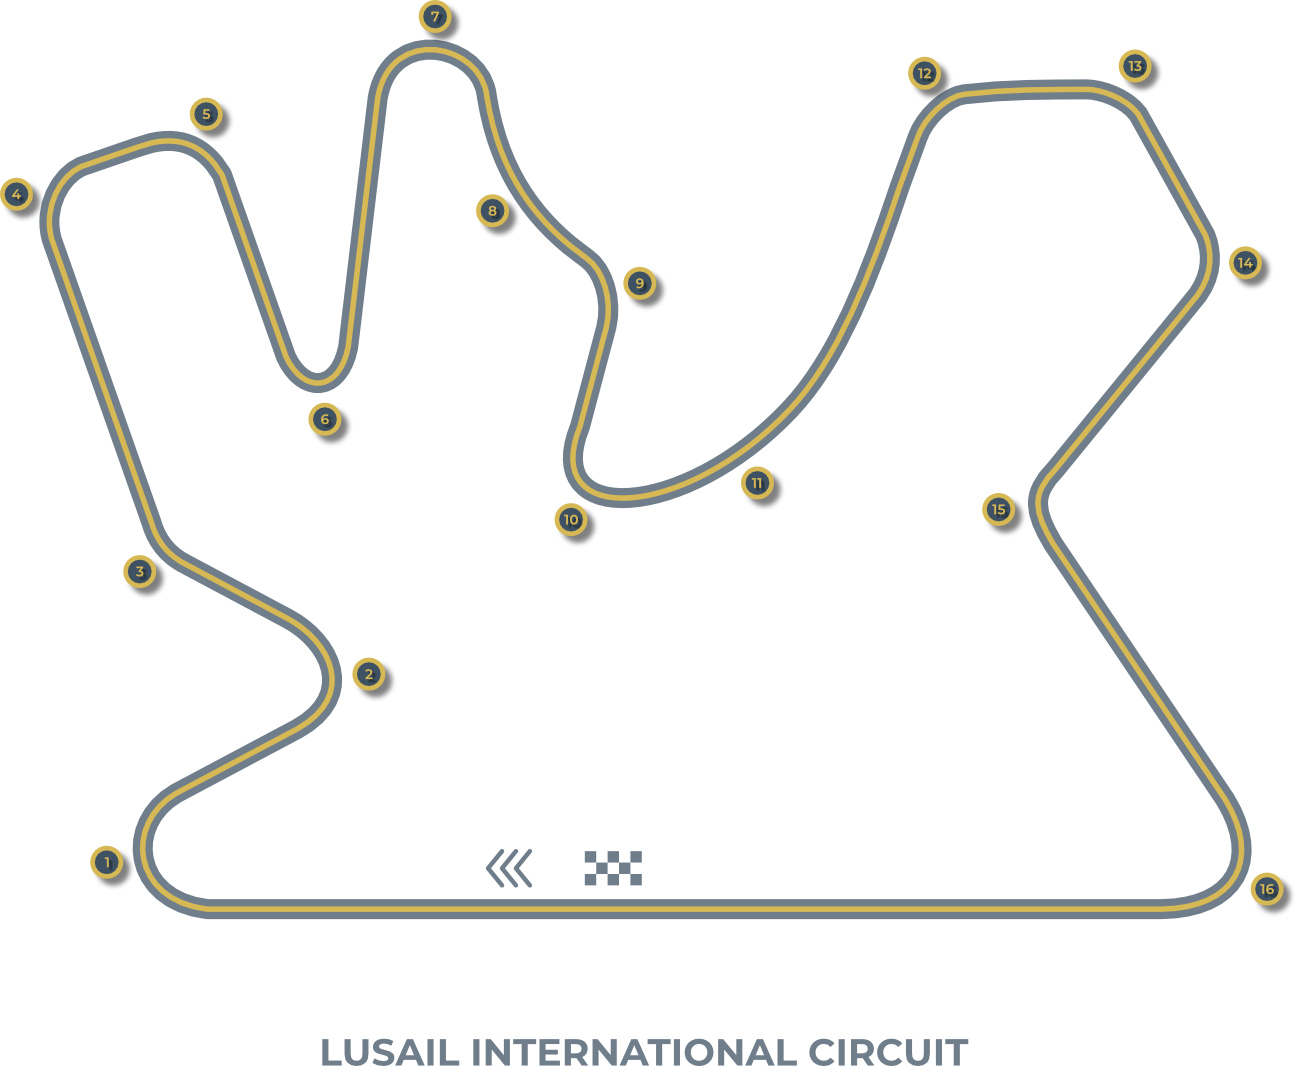 Map of Lusail International Circuit used for Qatar Formula OneGrand Prix showing start/finish and corners.